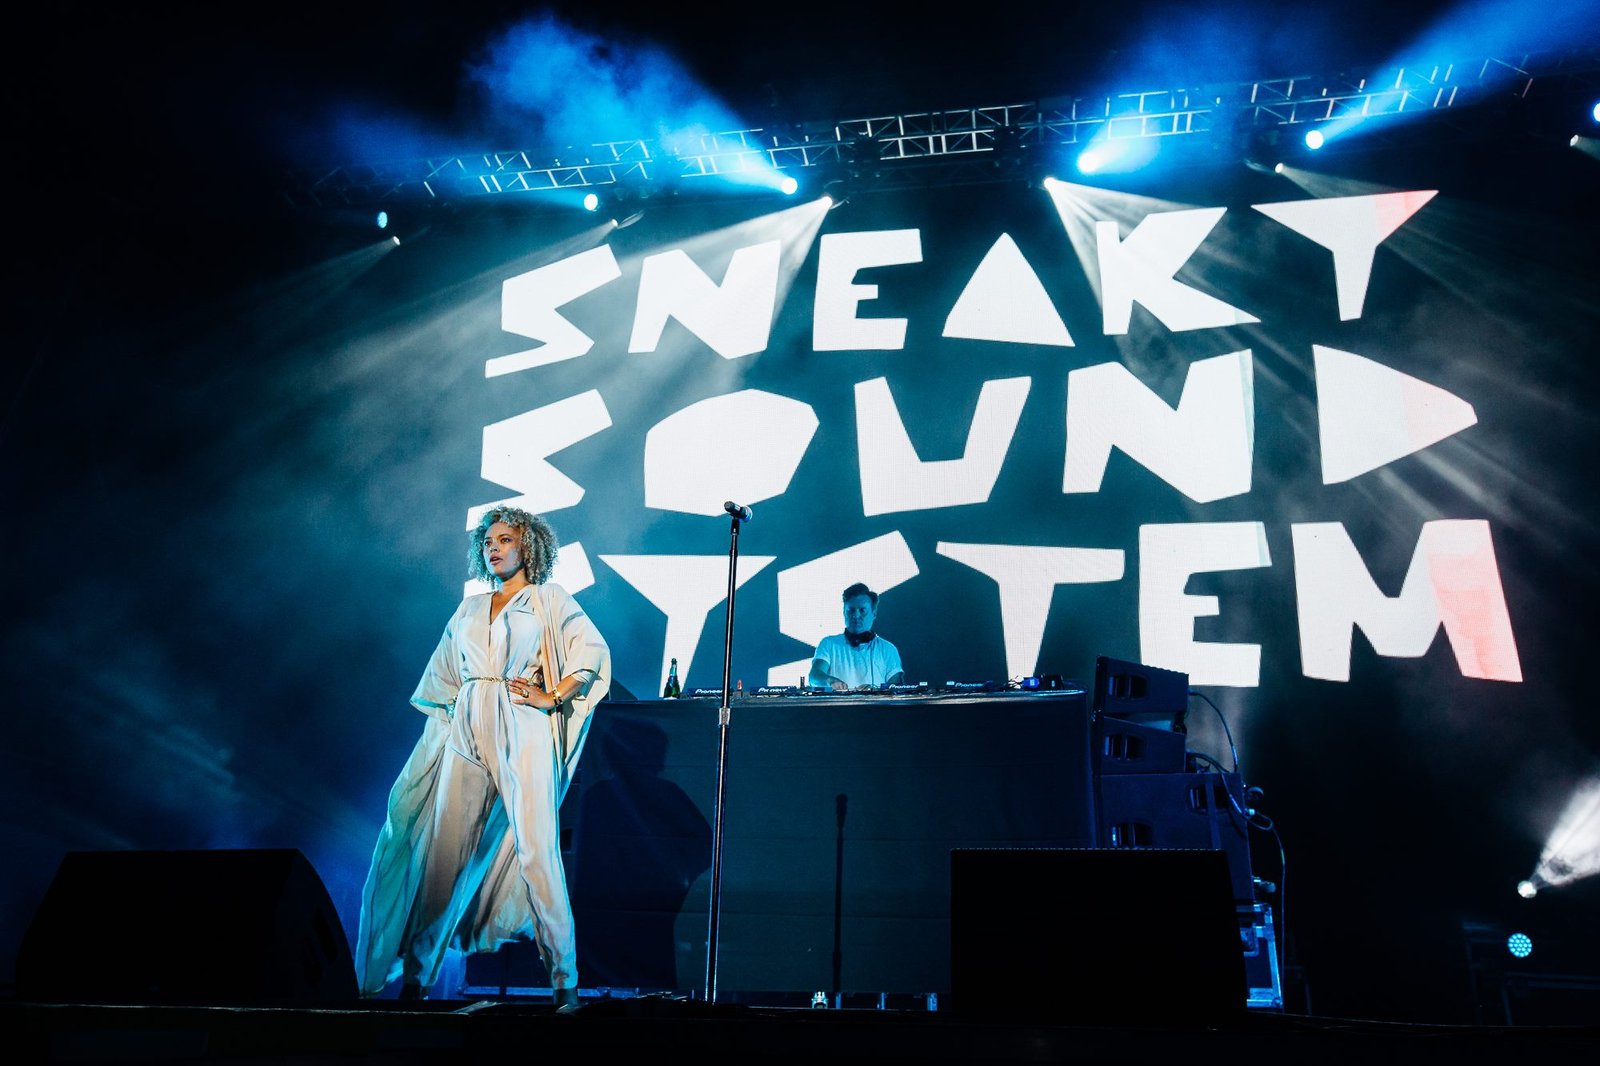 sneaky sound system summertime madness